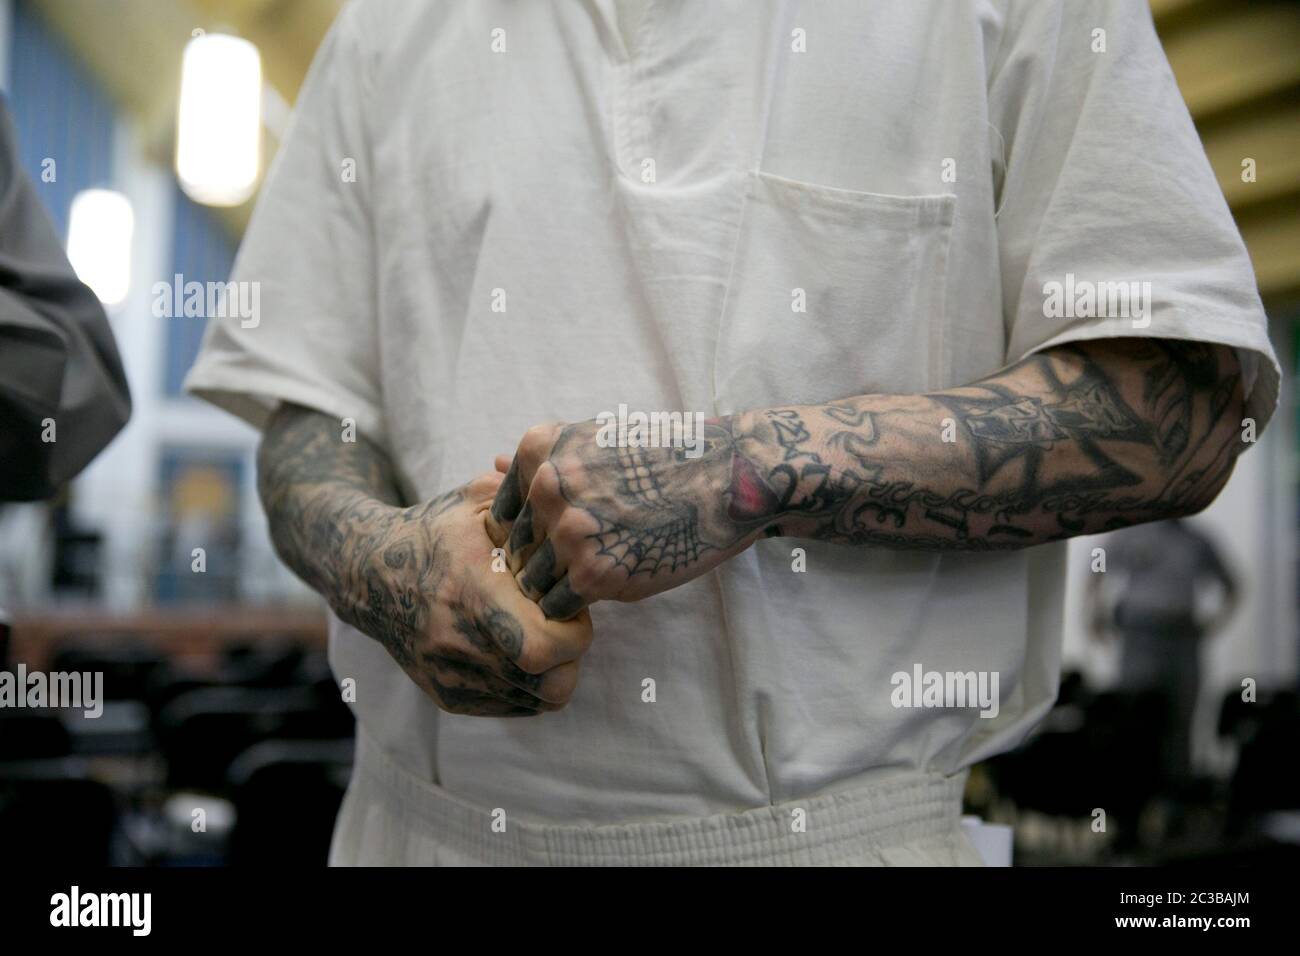 Rosharon Texas USA, August 25 2014: Heavily tattooed uniformed male inmate at the high-security Darrington prison stands in the lockup's chapel. He is attending a session that is part of a course for the Southwestern Baptist Theological Seminary, in which a number of prisoners are enrolled.  ©Marjorie Kamys Cotera/Daemmrich Photography Stock Photo